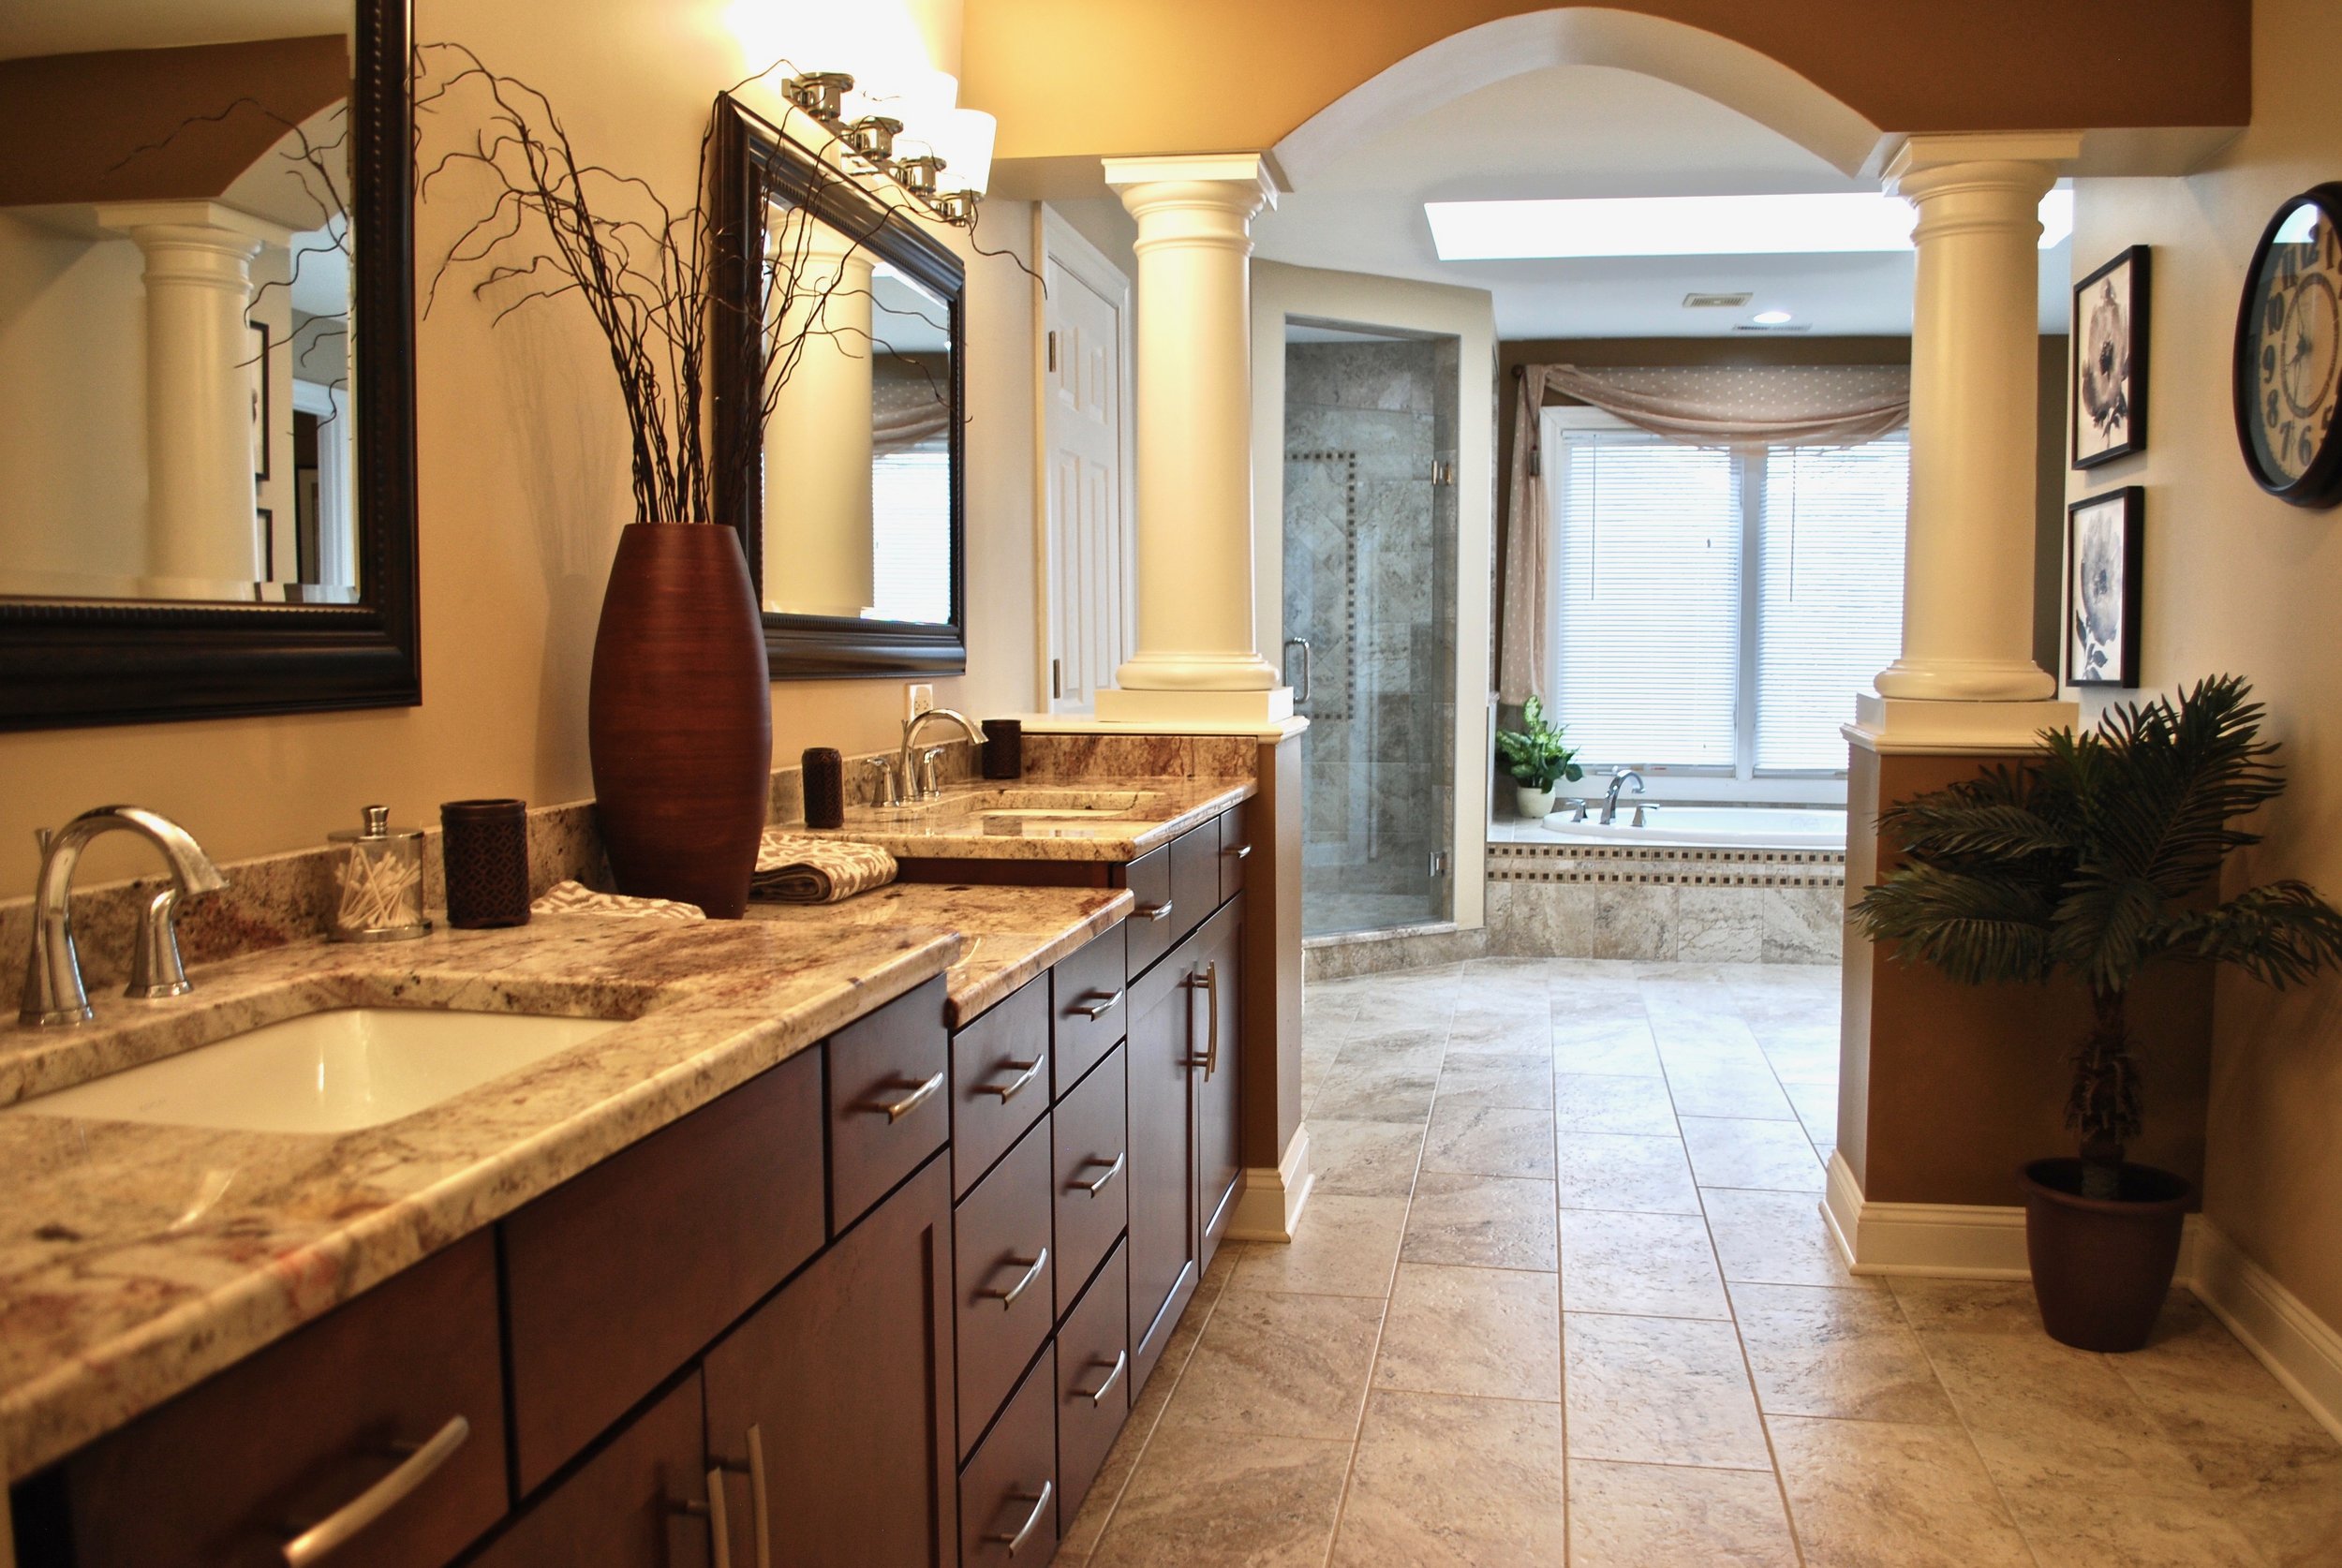 Eagle Brook Subdivision in Geneva IL. Bathroom Remodeling Photos AFTER